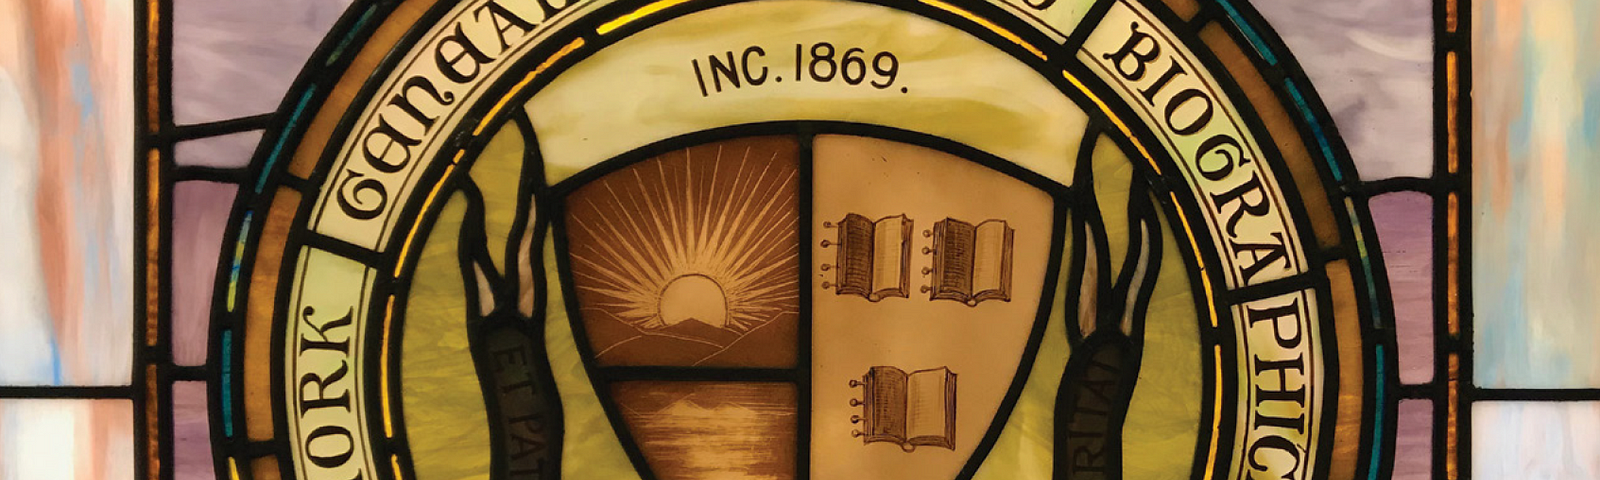 A stained glass window depicting the seal of the New York Genealogical and Biographical Society. The seal is divided in half, consisting of a rising sun over water on the left and three open books on the right.